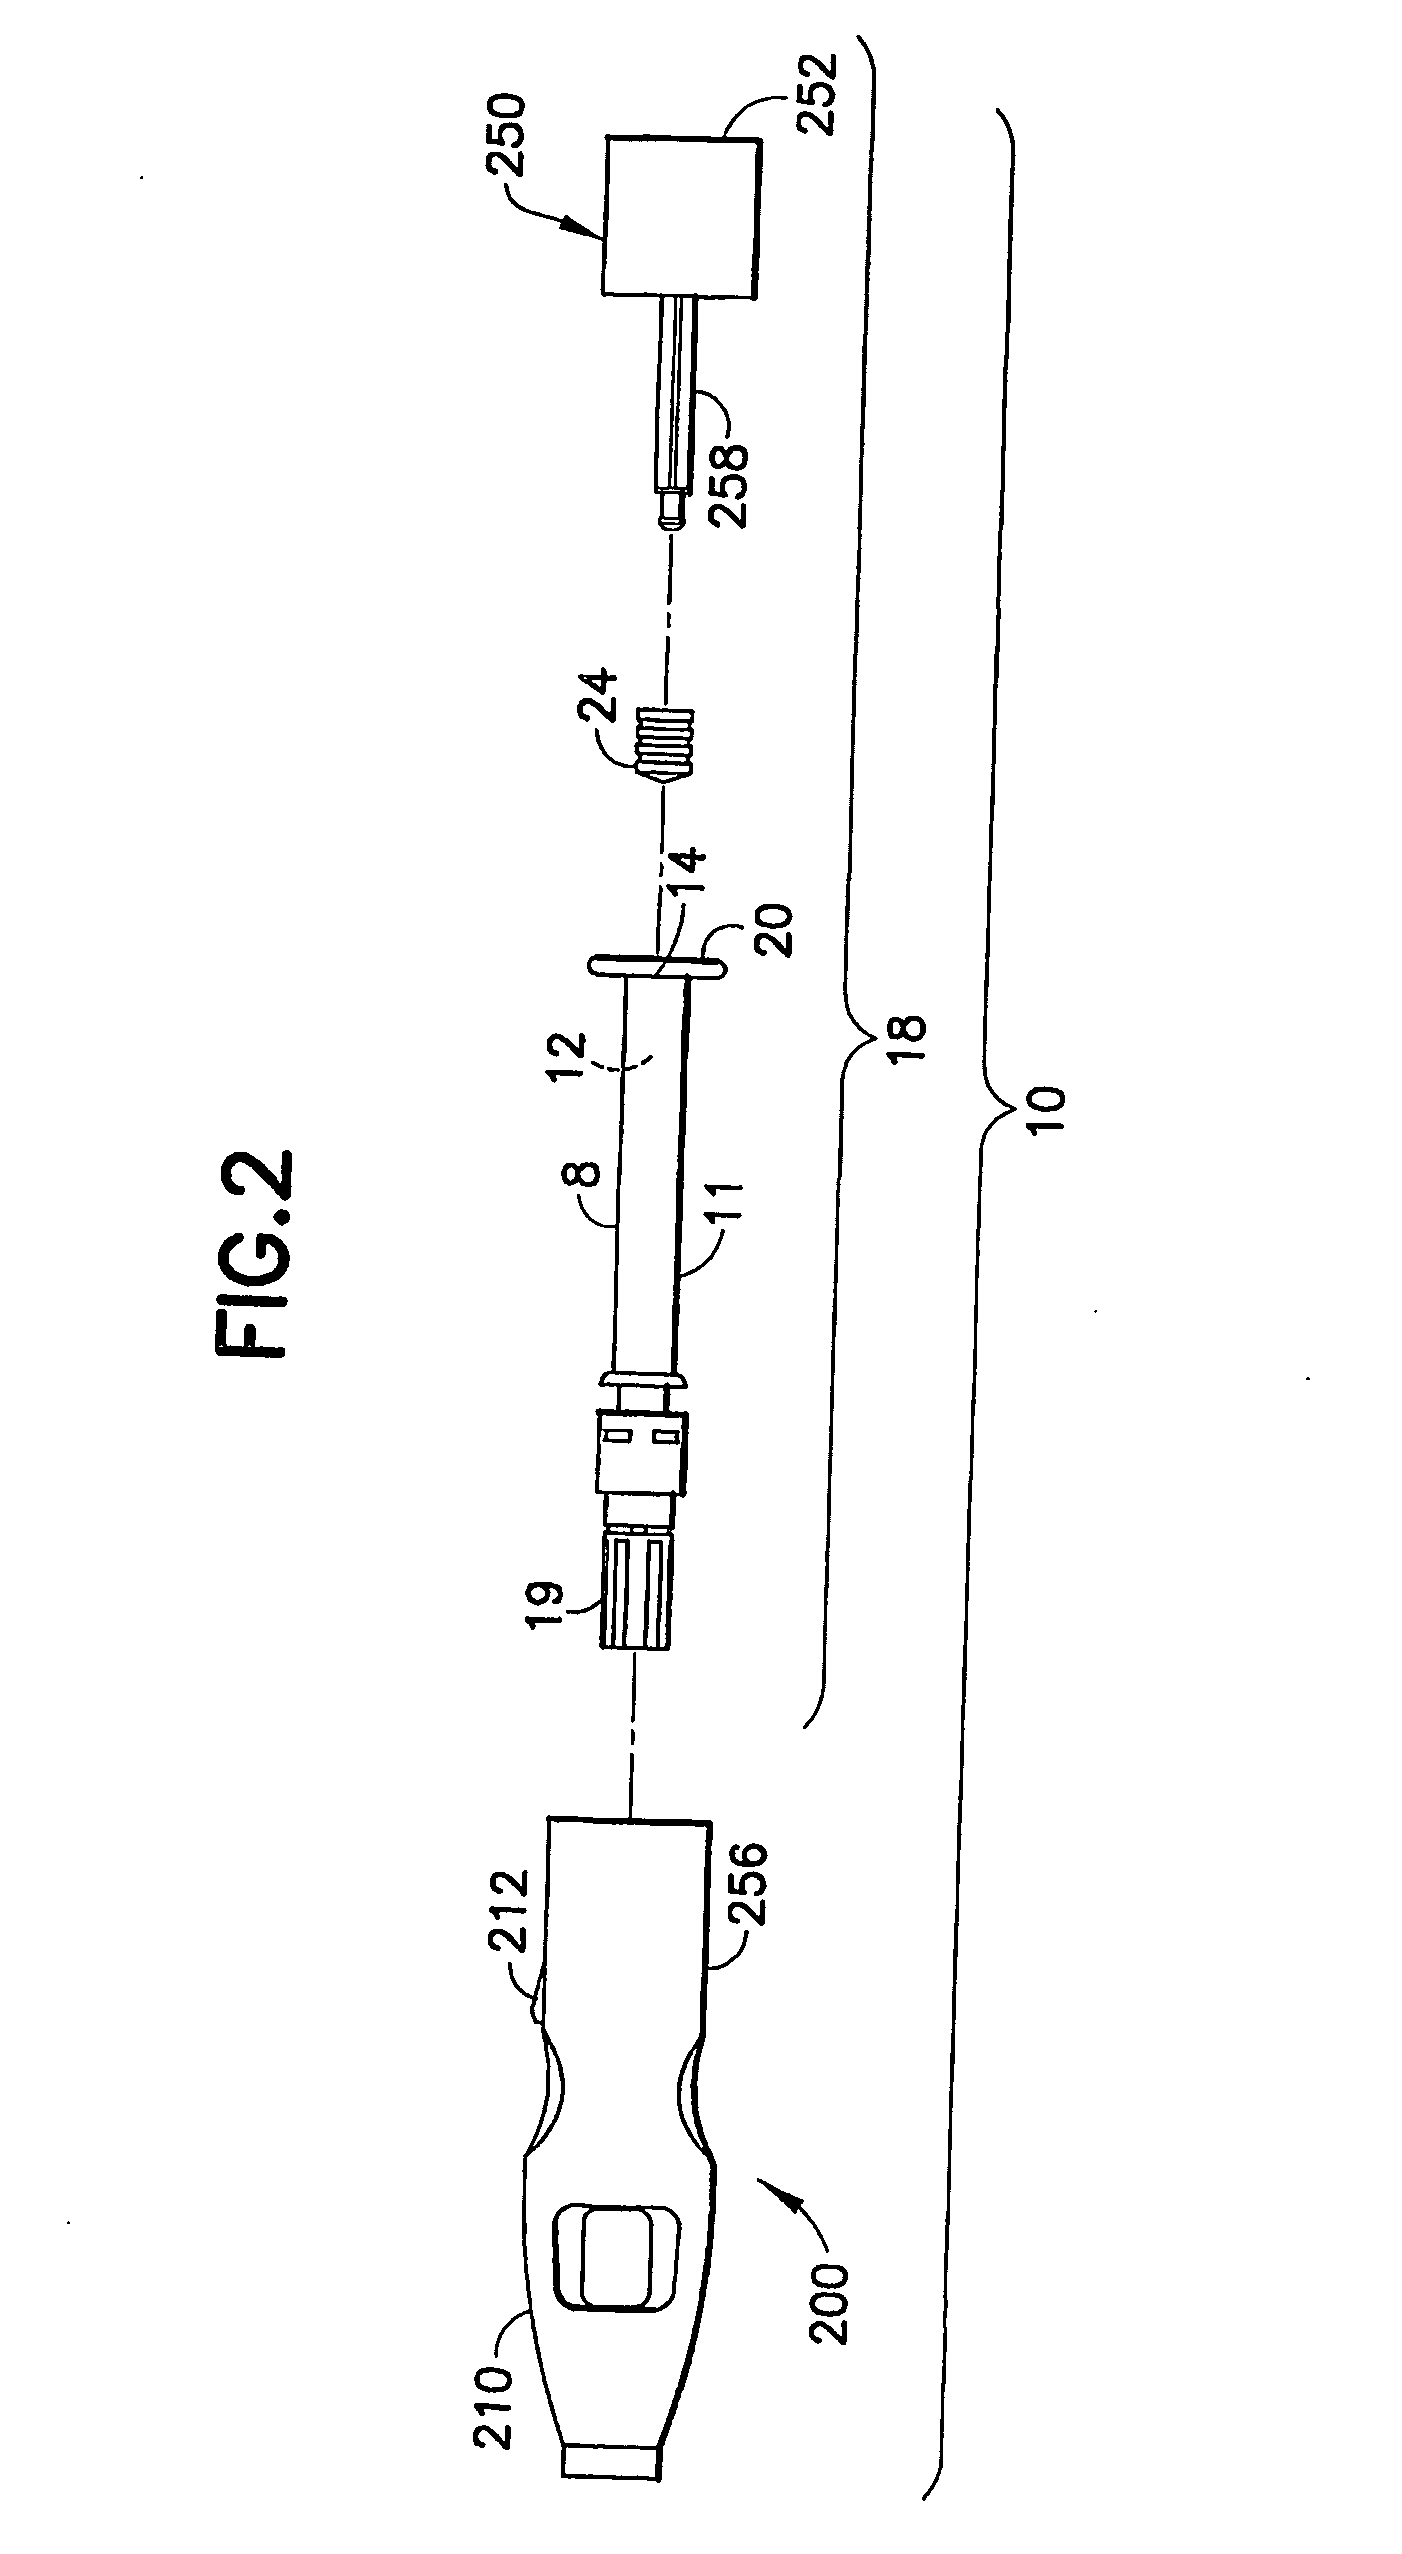 Holder with safety shield for a drug delivery device